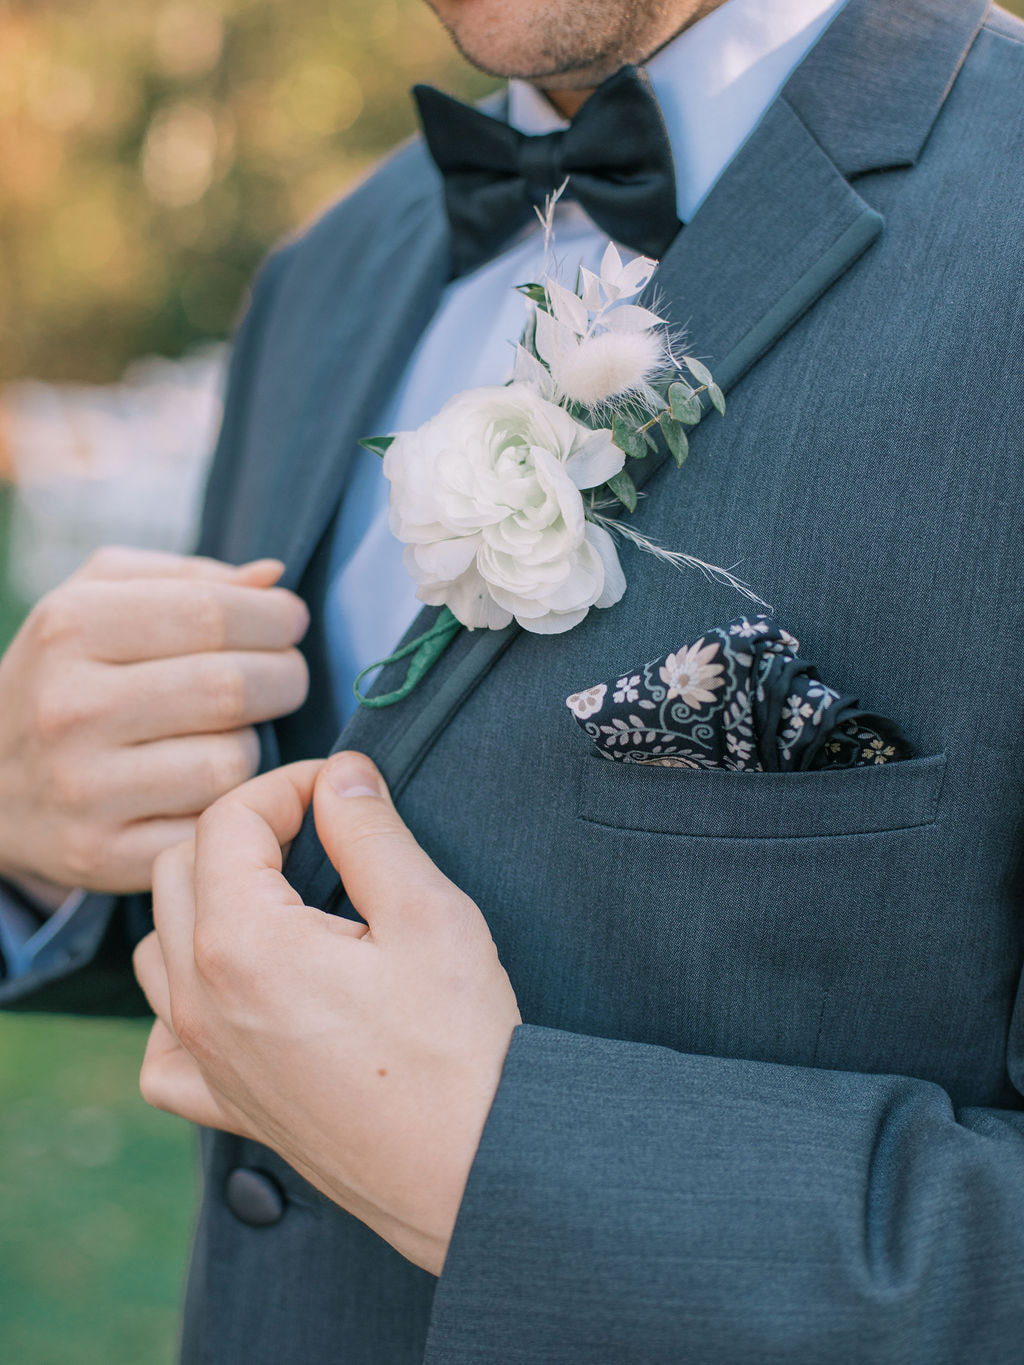 detail photo of groom's suit, pocket square, and boutonniere